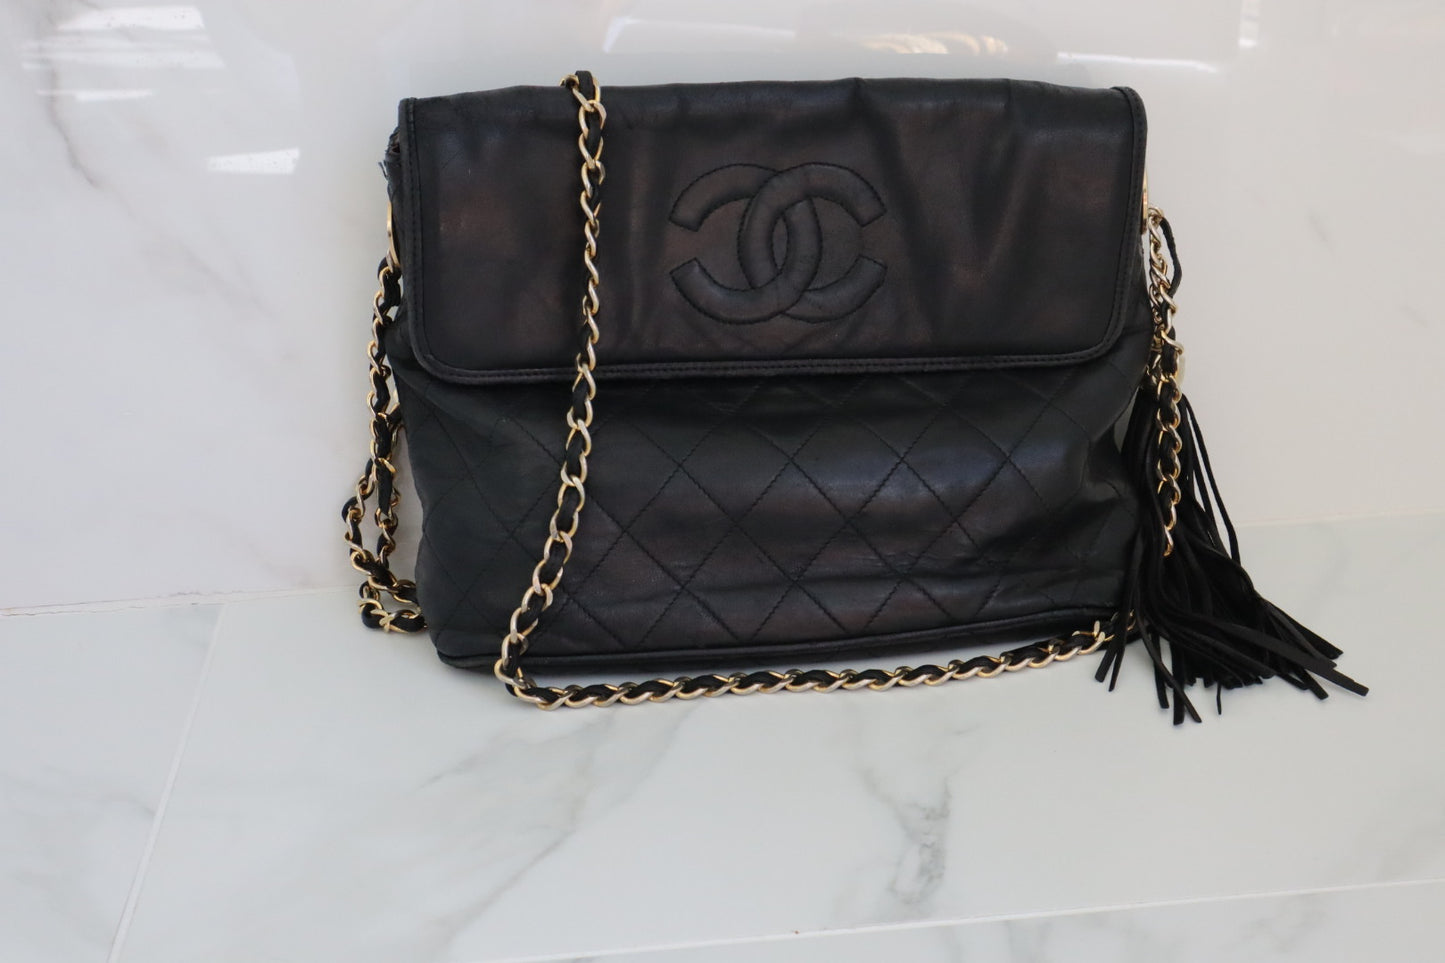 Name of this vintage bag? : r/chanel